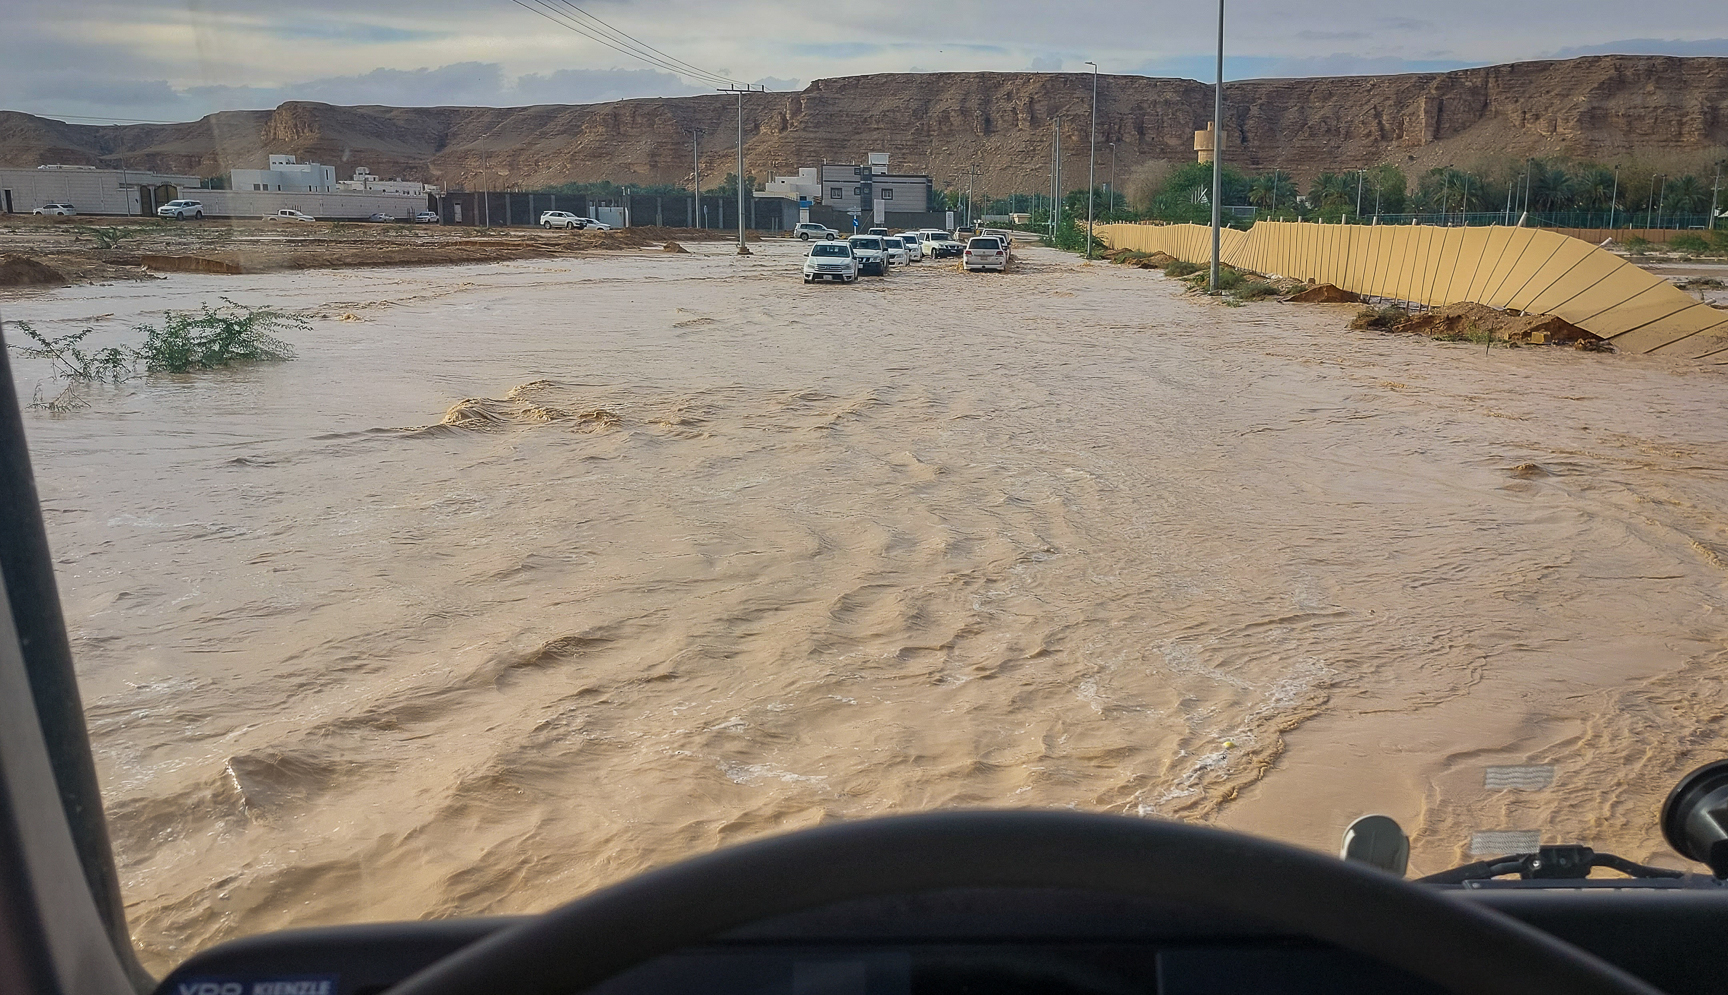 <span  class="uc_style_uc_tiles_grid_image_elementor_uc_items_attribute_title" style="color:#ffffff;">watch out in the desert when it was raining: floods can happen von 1 minute to the other (no problem for Wischneski, just drive through it!)</span>